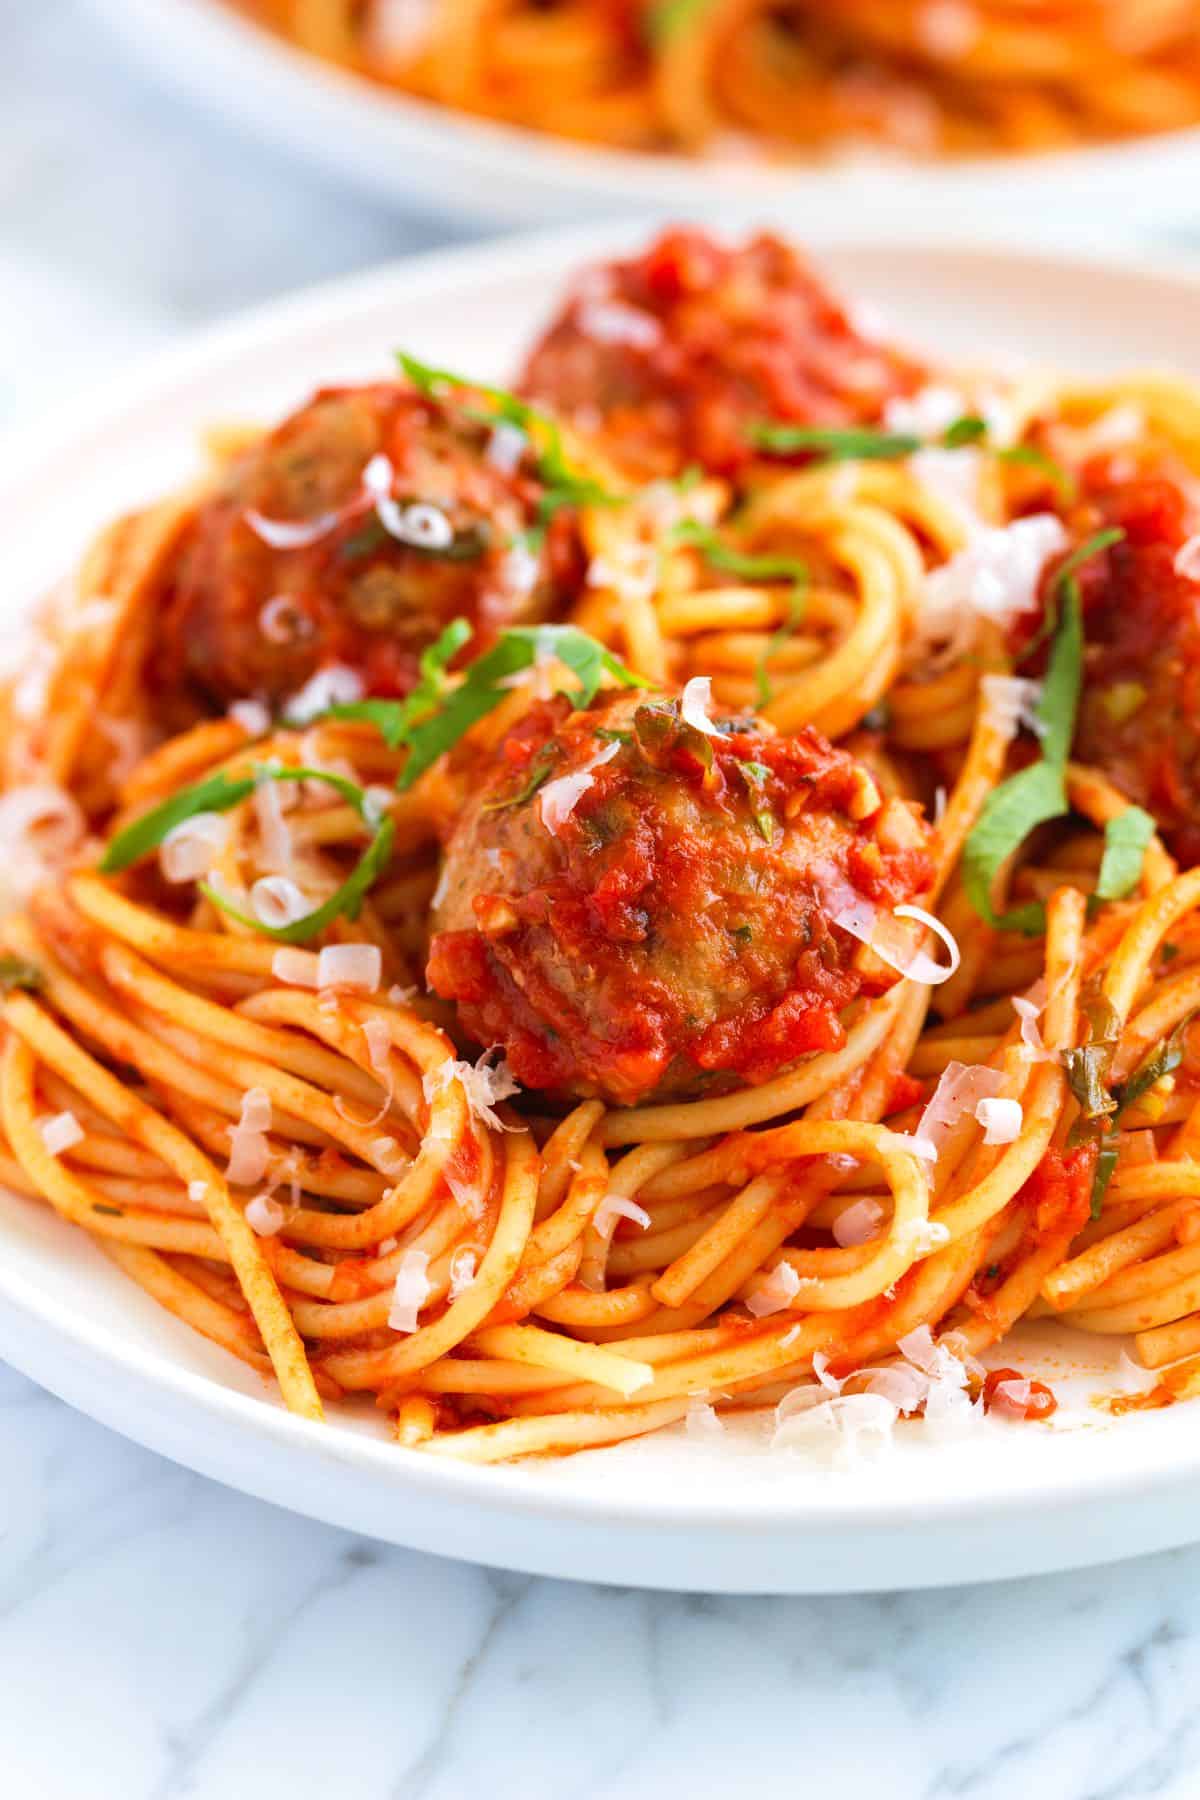 Best spaghetti and meatballs (made from scratch)